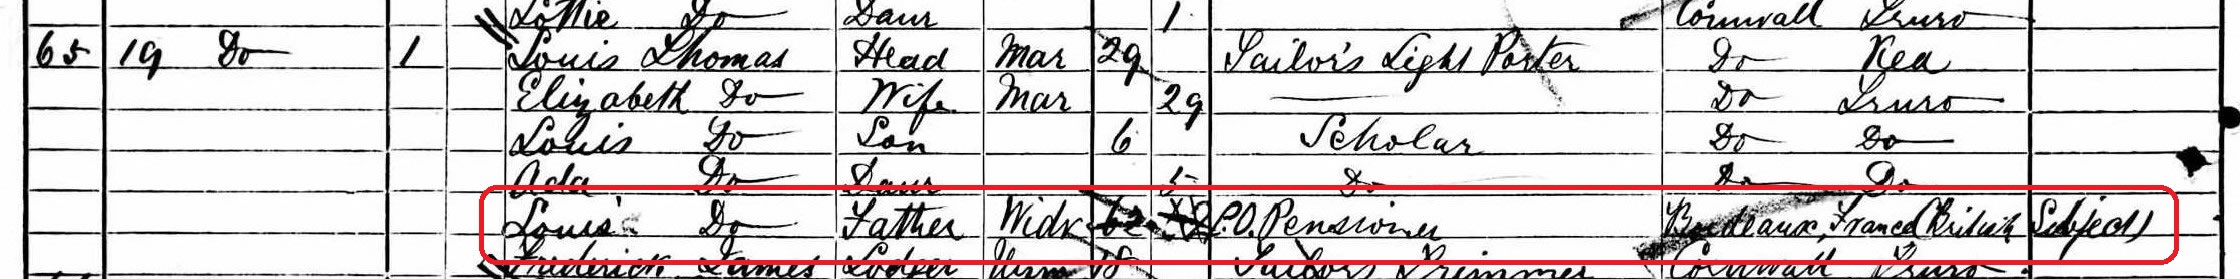 1881 census reveals that Louis Thomas had been born in Bordeaux